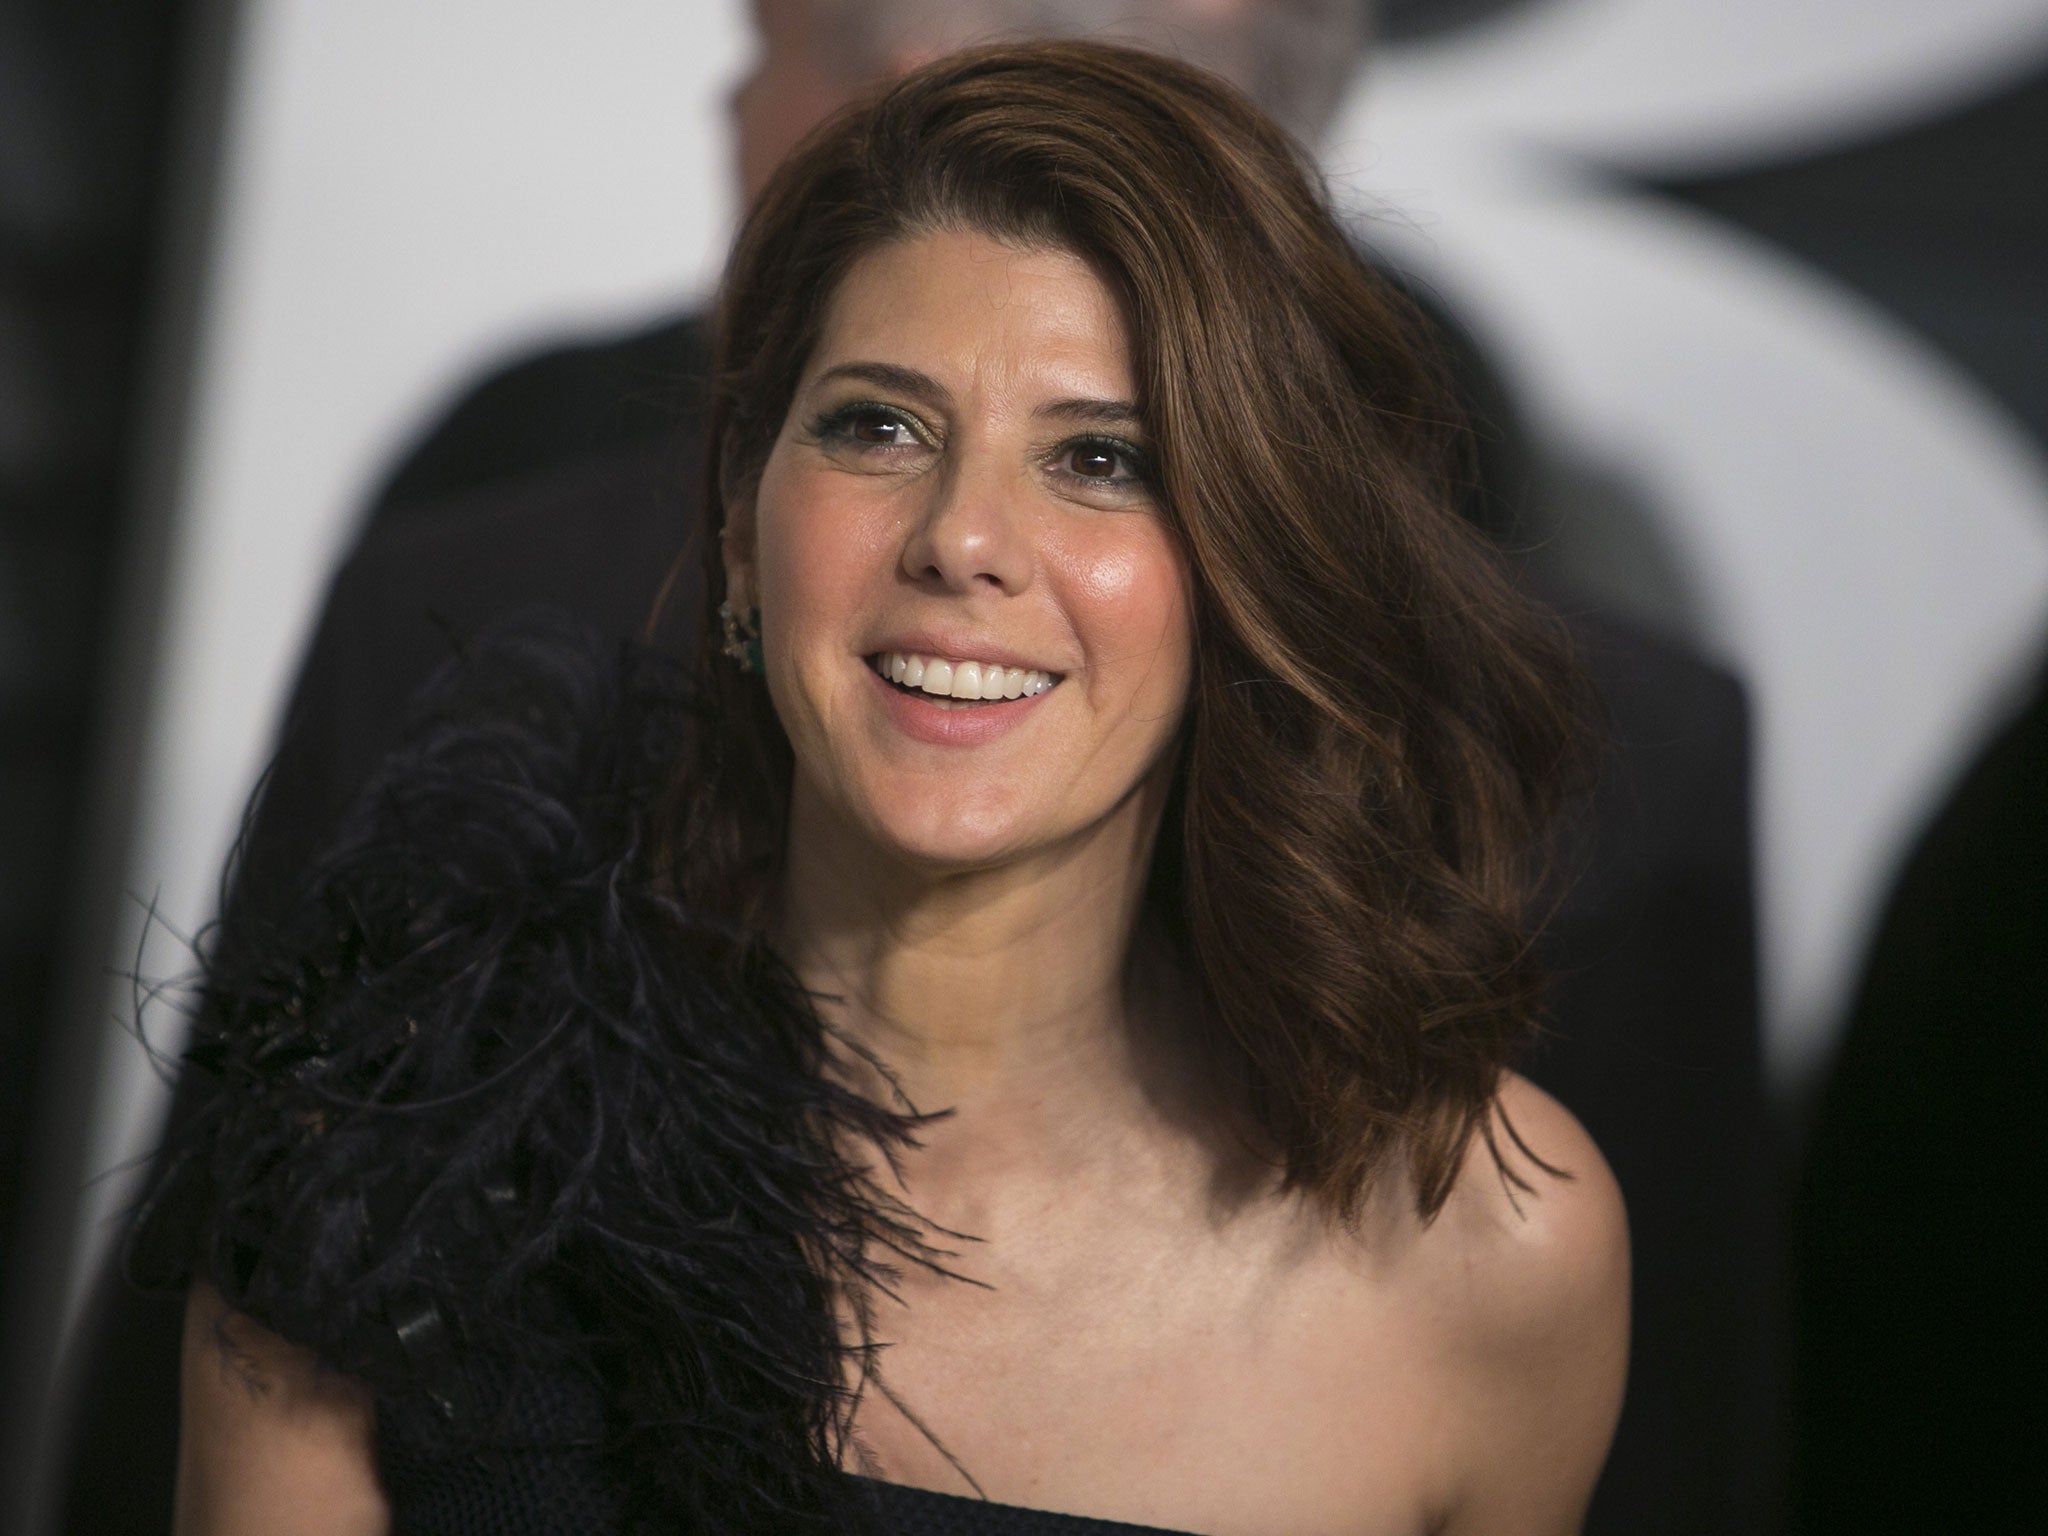 Marisa Tomei is in final negotiations to take up the role of Aunt May in Spider-Man